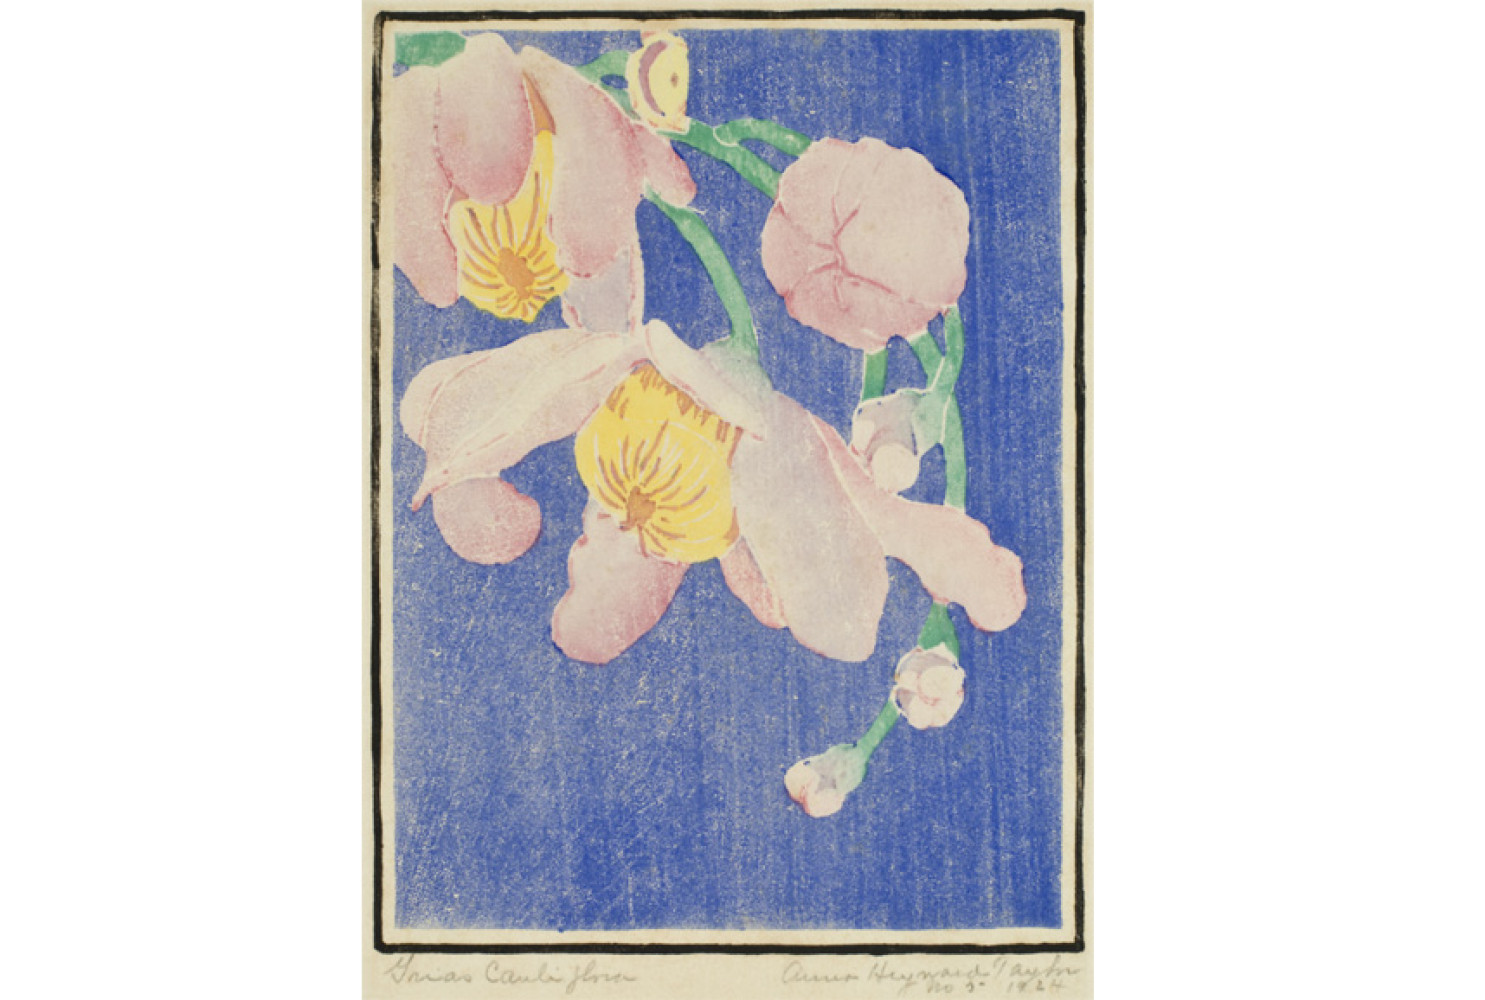 Grias Cauliflora, 1924, By Anna Heyward Taylor (American, 1879—1956); Color woodblock print on paper; 10 7/8 x 7 1/2 inches; Gift of the Artist; 1953.007.0031 
